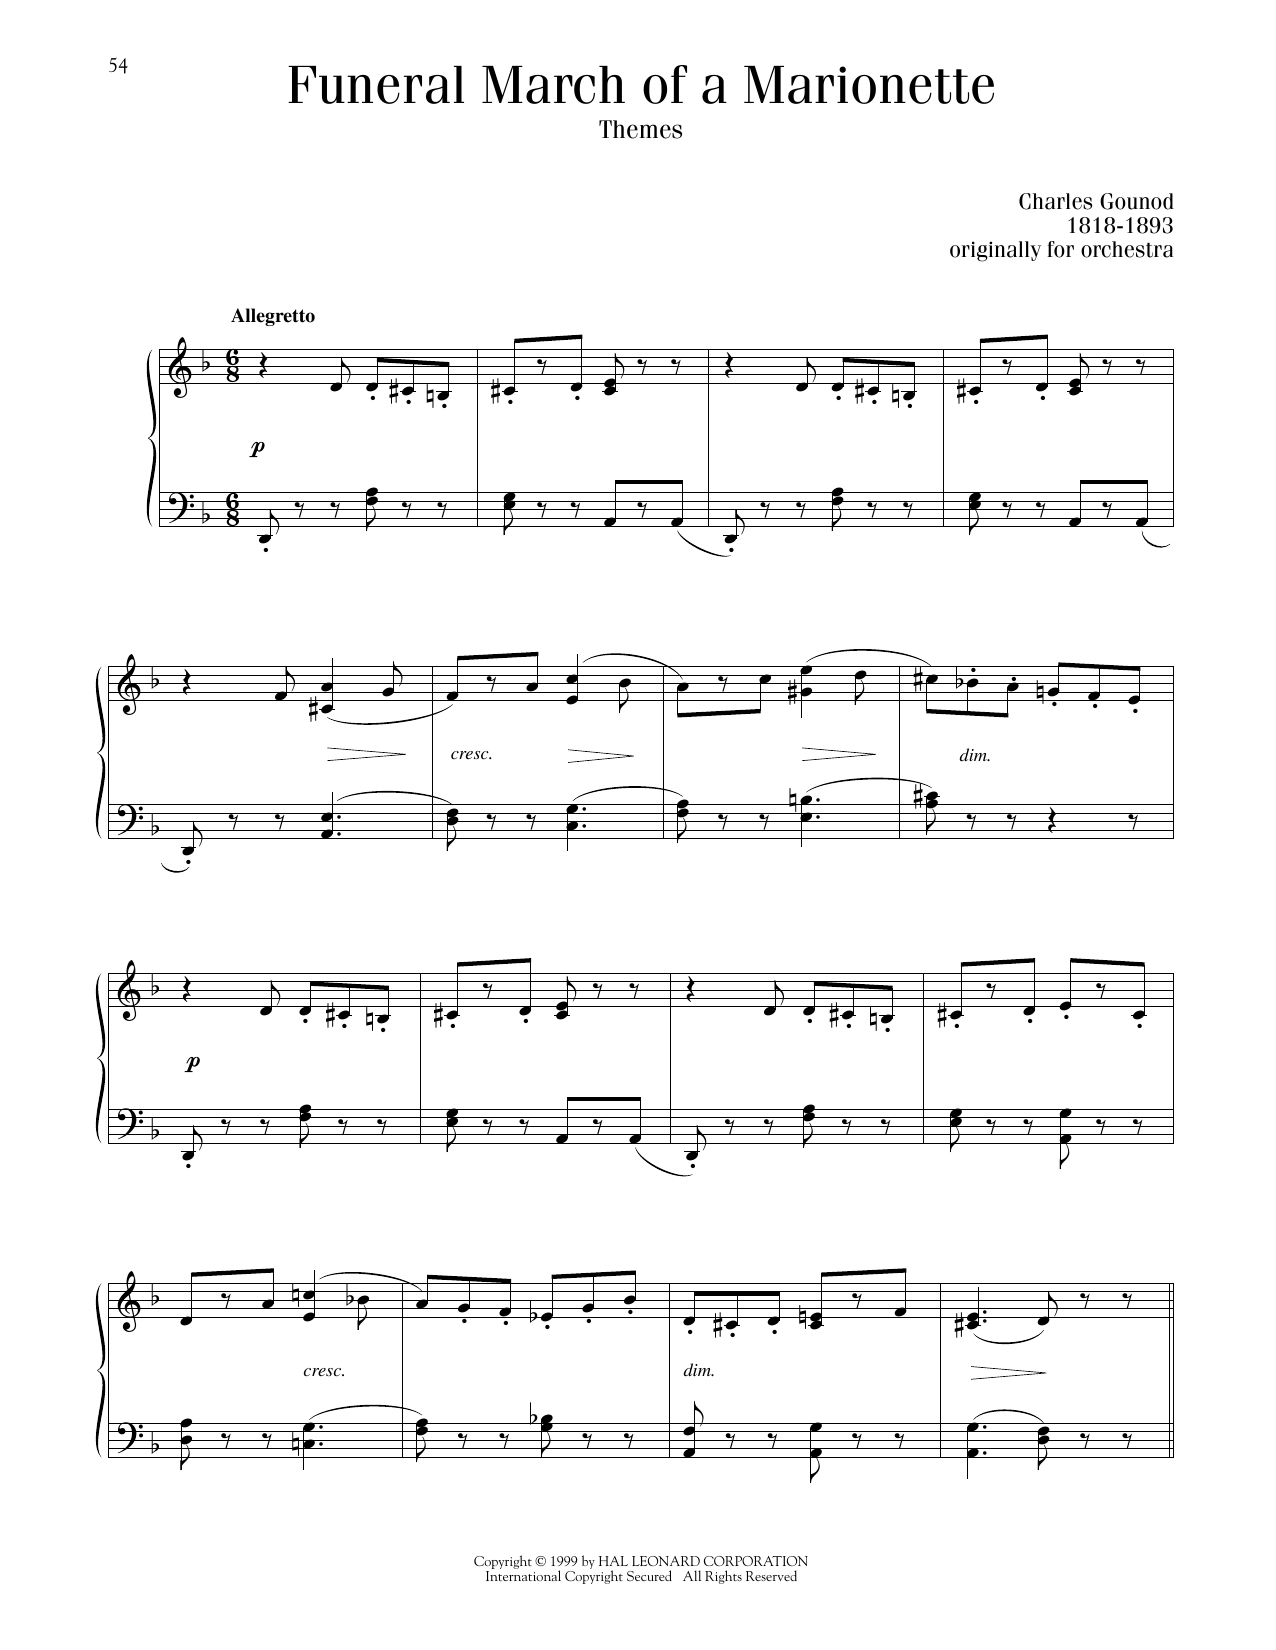 Charles Gounod Funeral March Of A Marionette sheet music notes printable PDF score